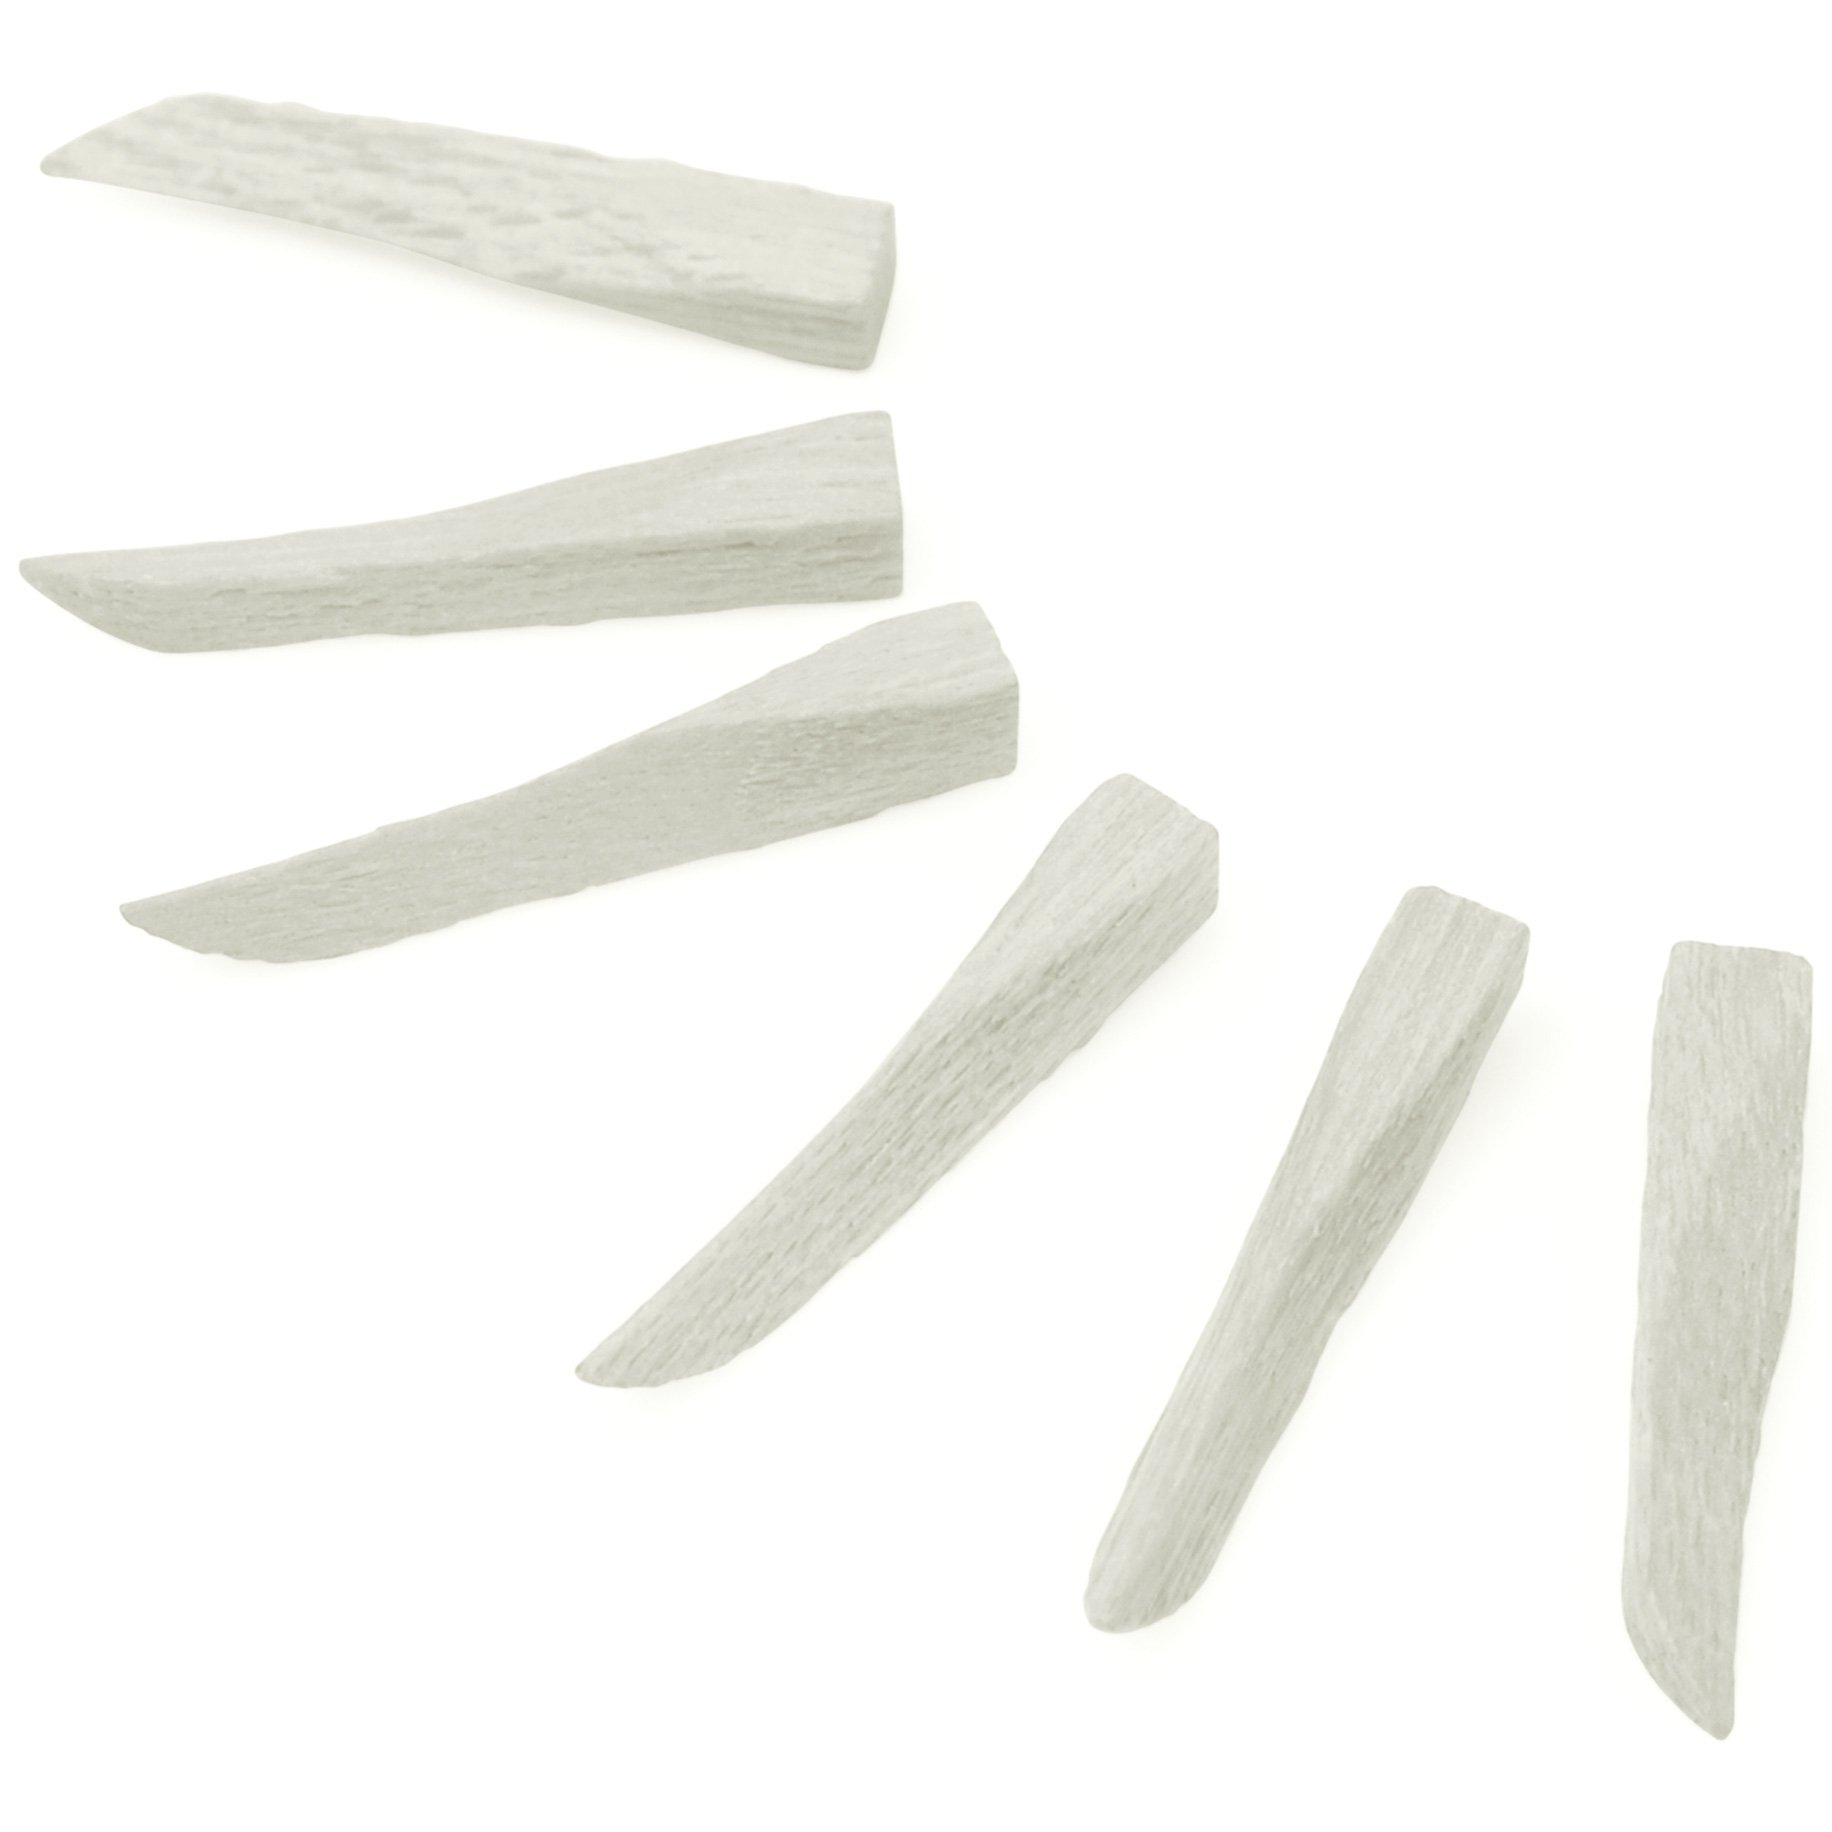 Sycamore Interdental Wedges 20 White 